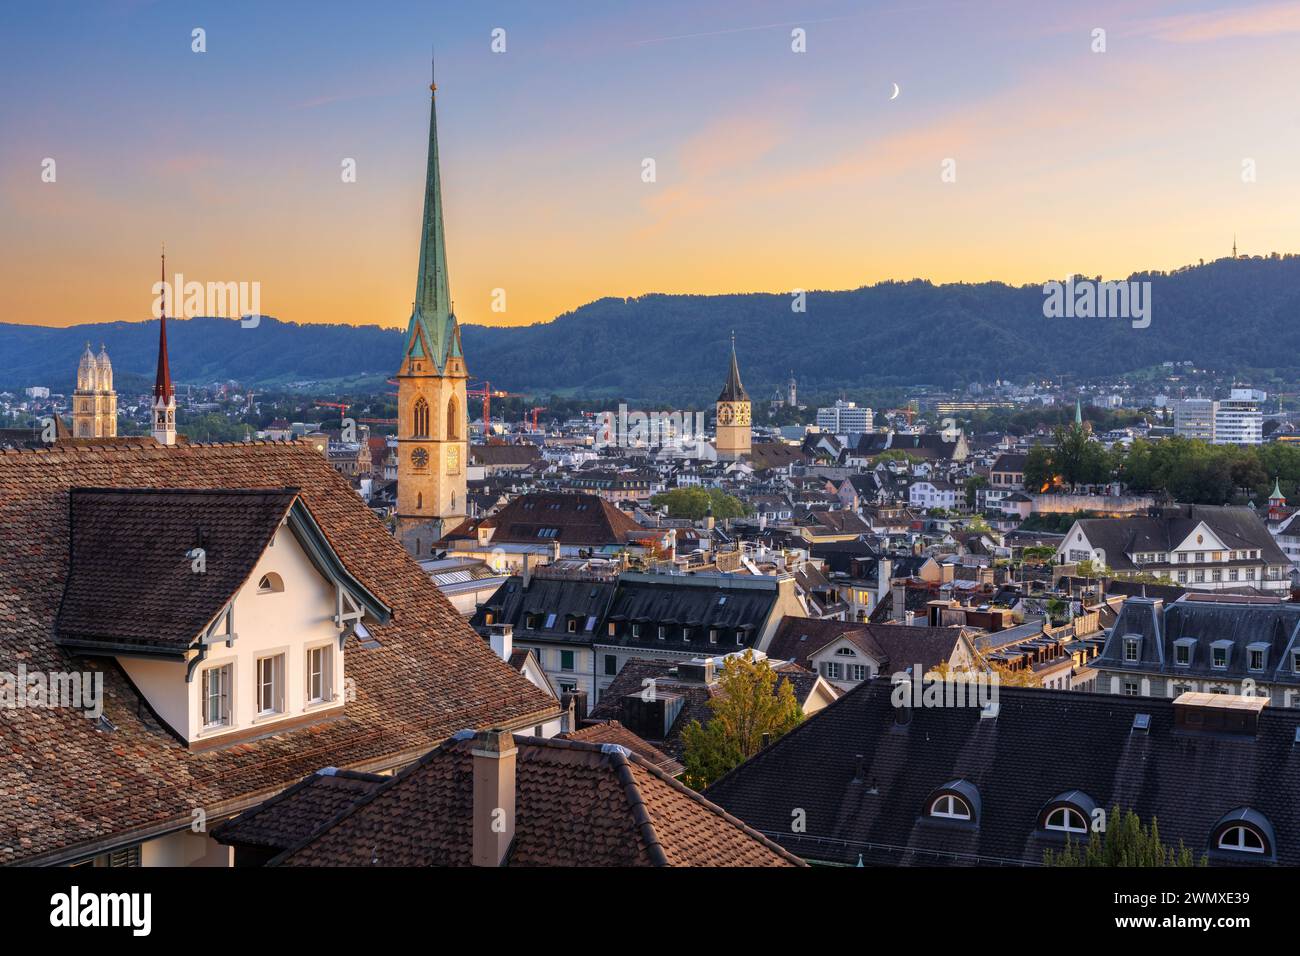 Zurich, Switzerland cityscape with church steeples at twilight. Stock Photo